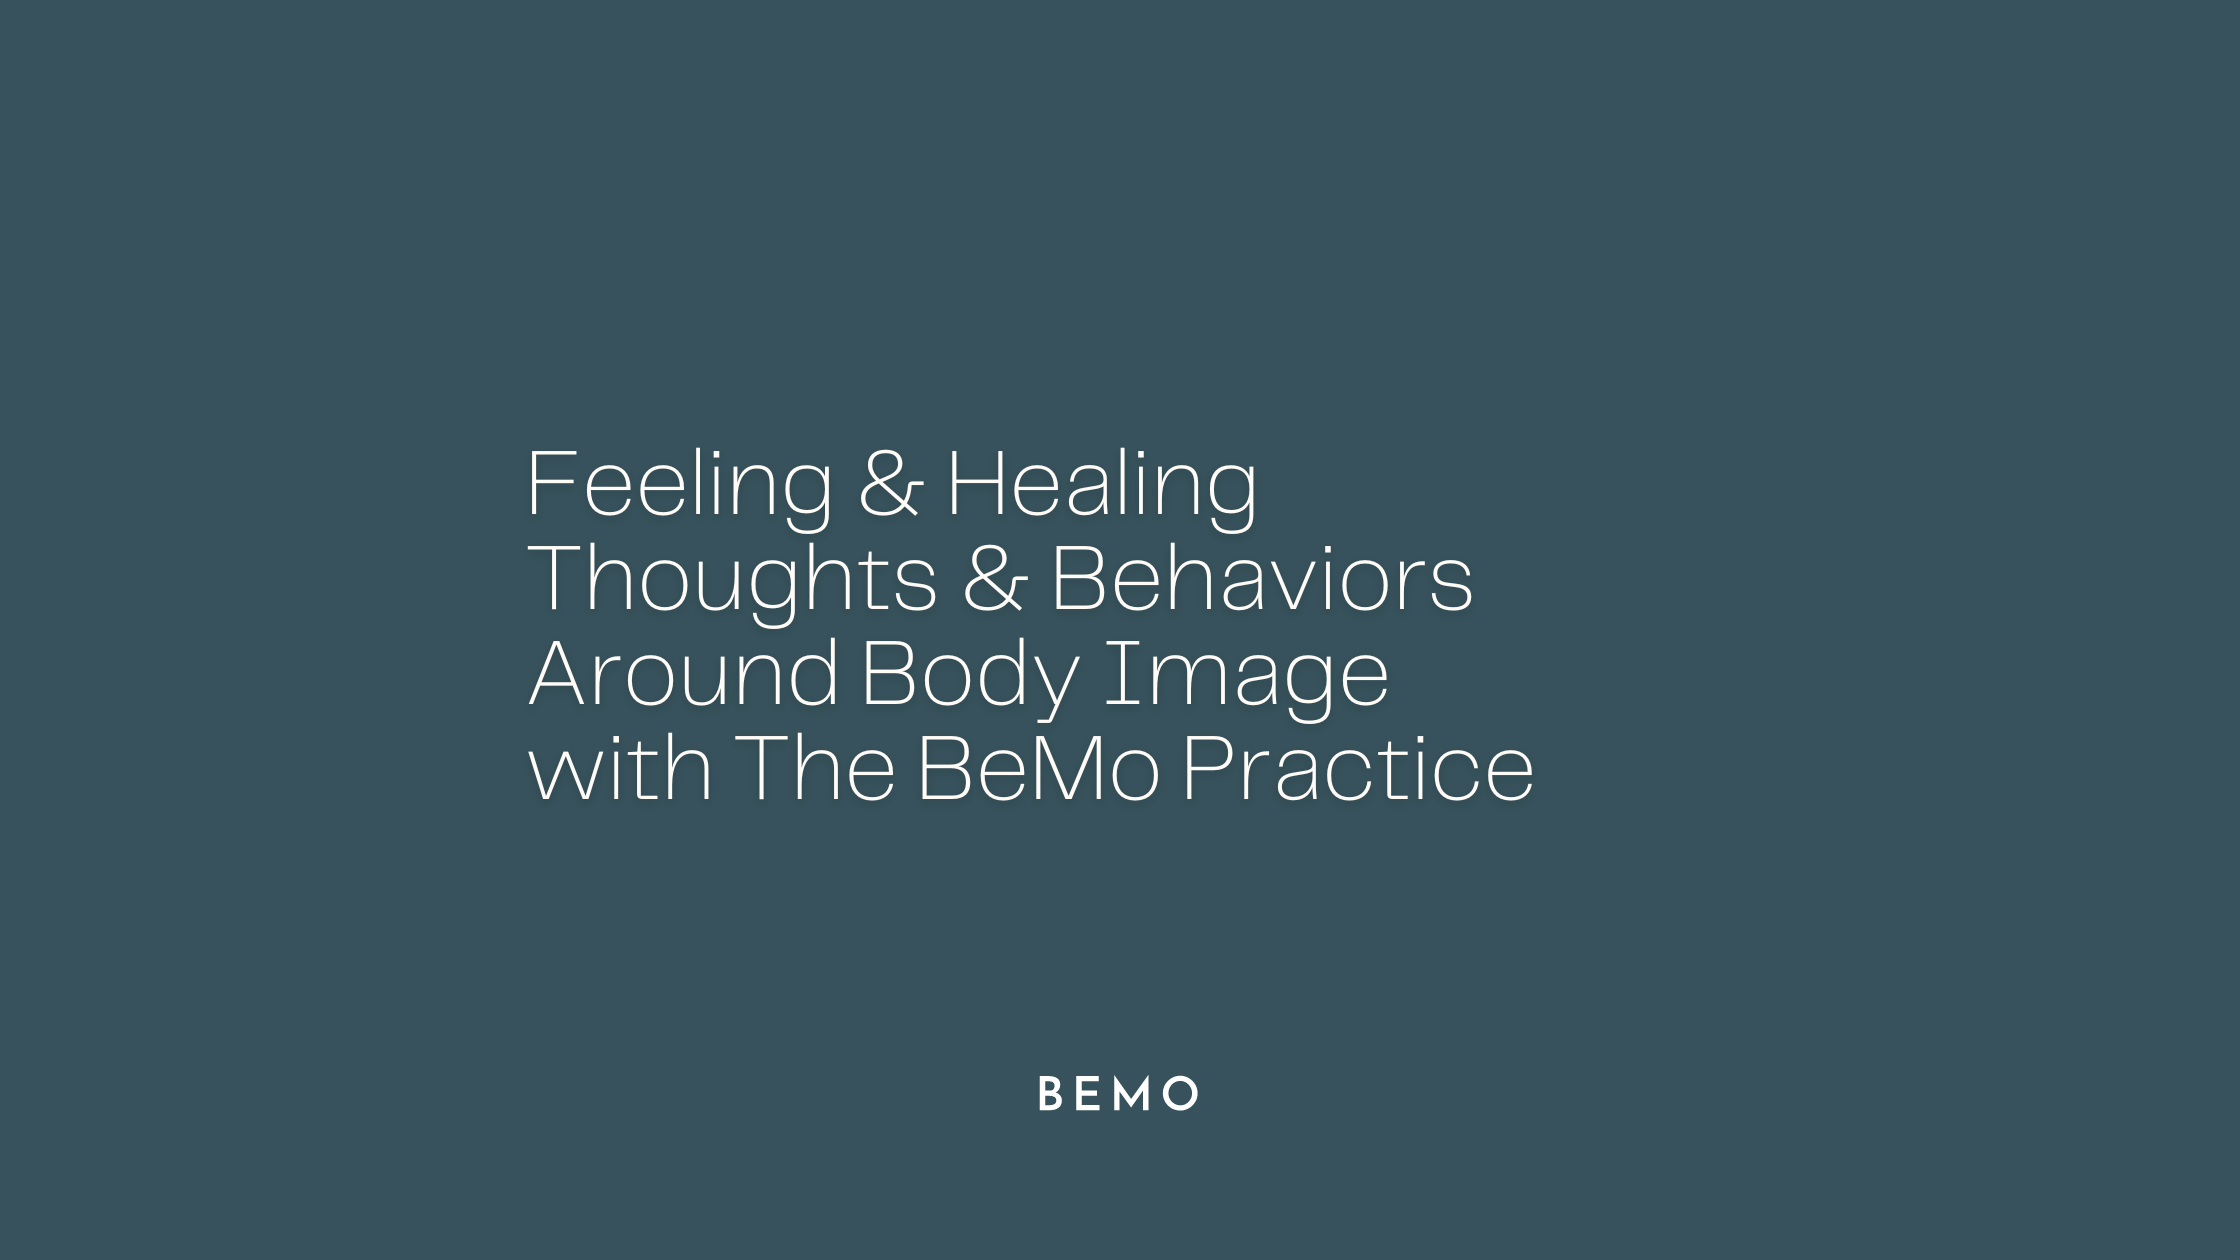 Feeling & Healing Thoughts & Behaviors Around Body Image with The BeMo Practice